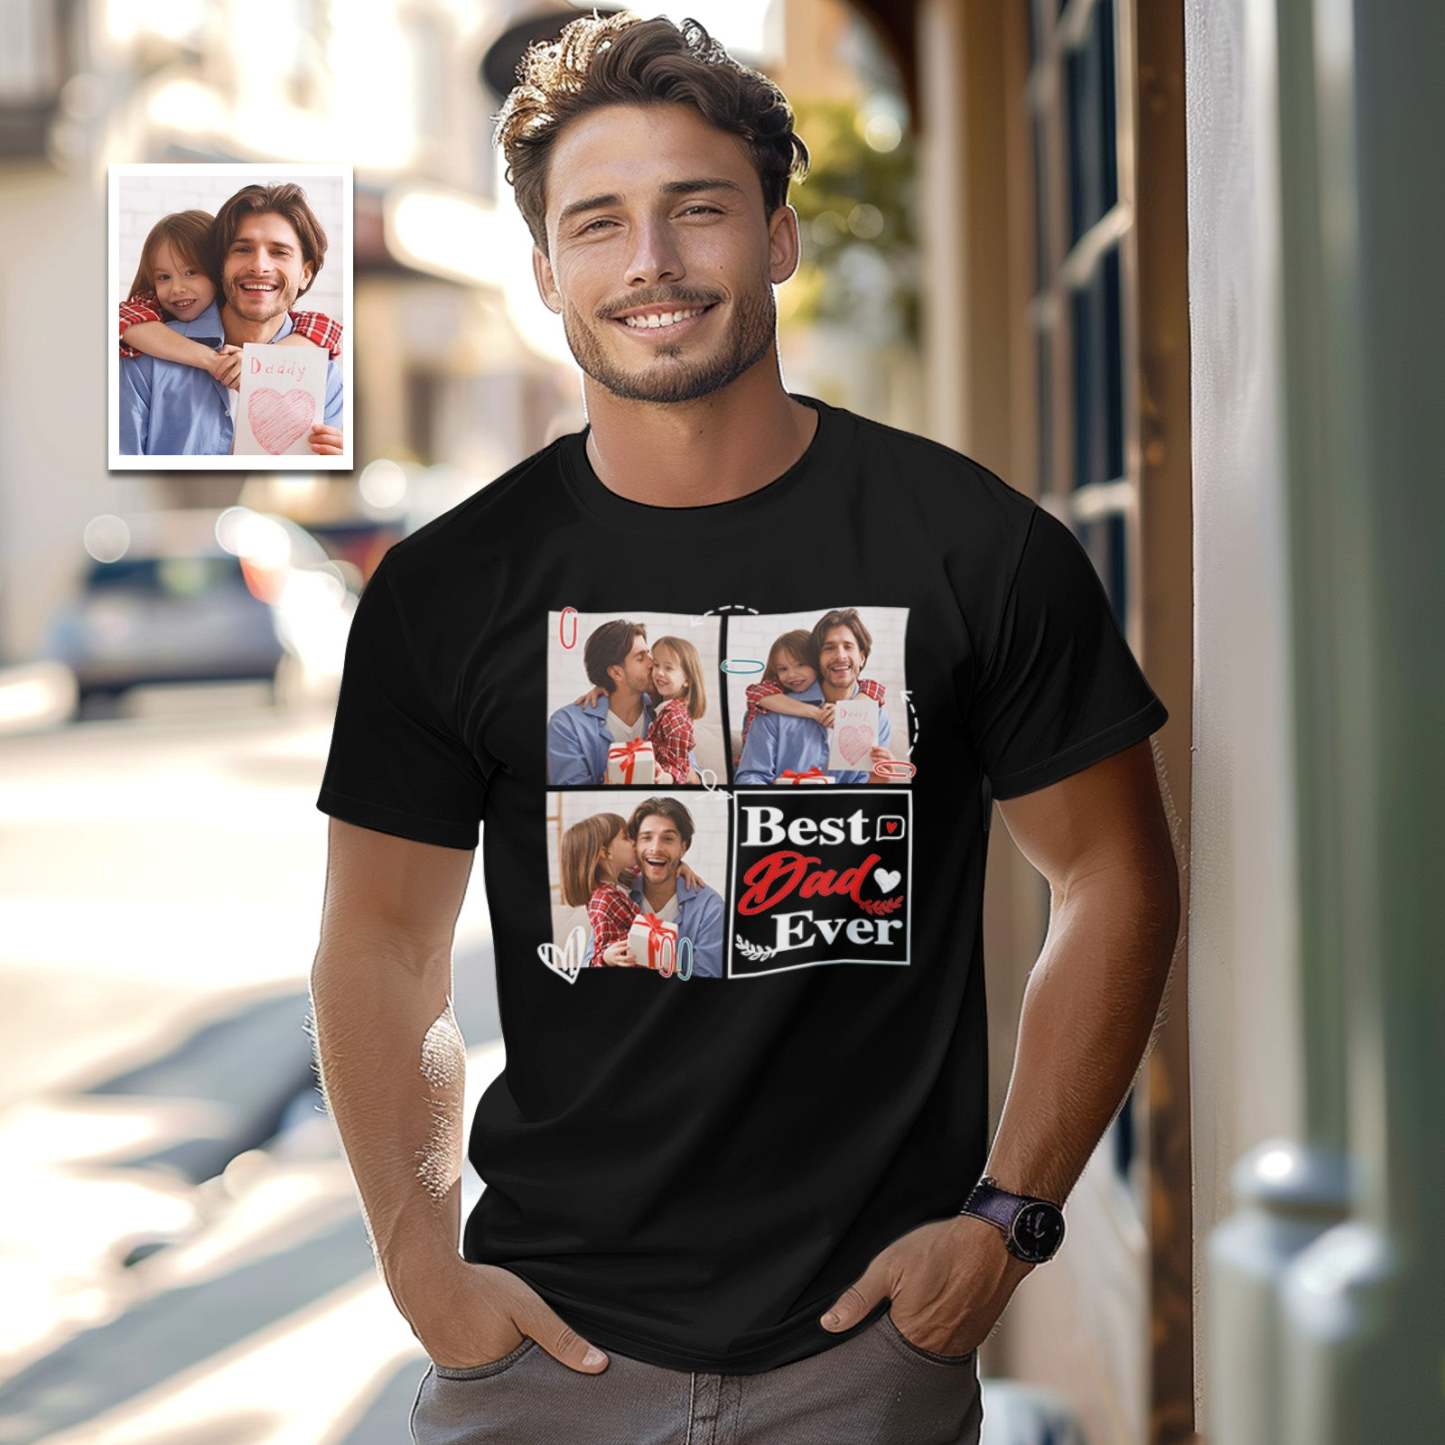 Custom 3 Photos T-Shirt Personalized Photo Men's T-Shirt Best Dad Ever Father's Day Gift Family T-Shirt - GetPhotoSocksUk